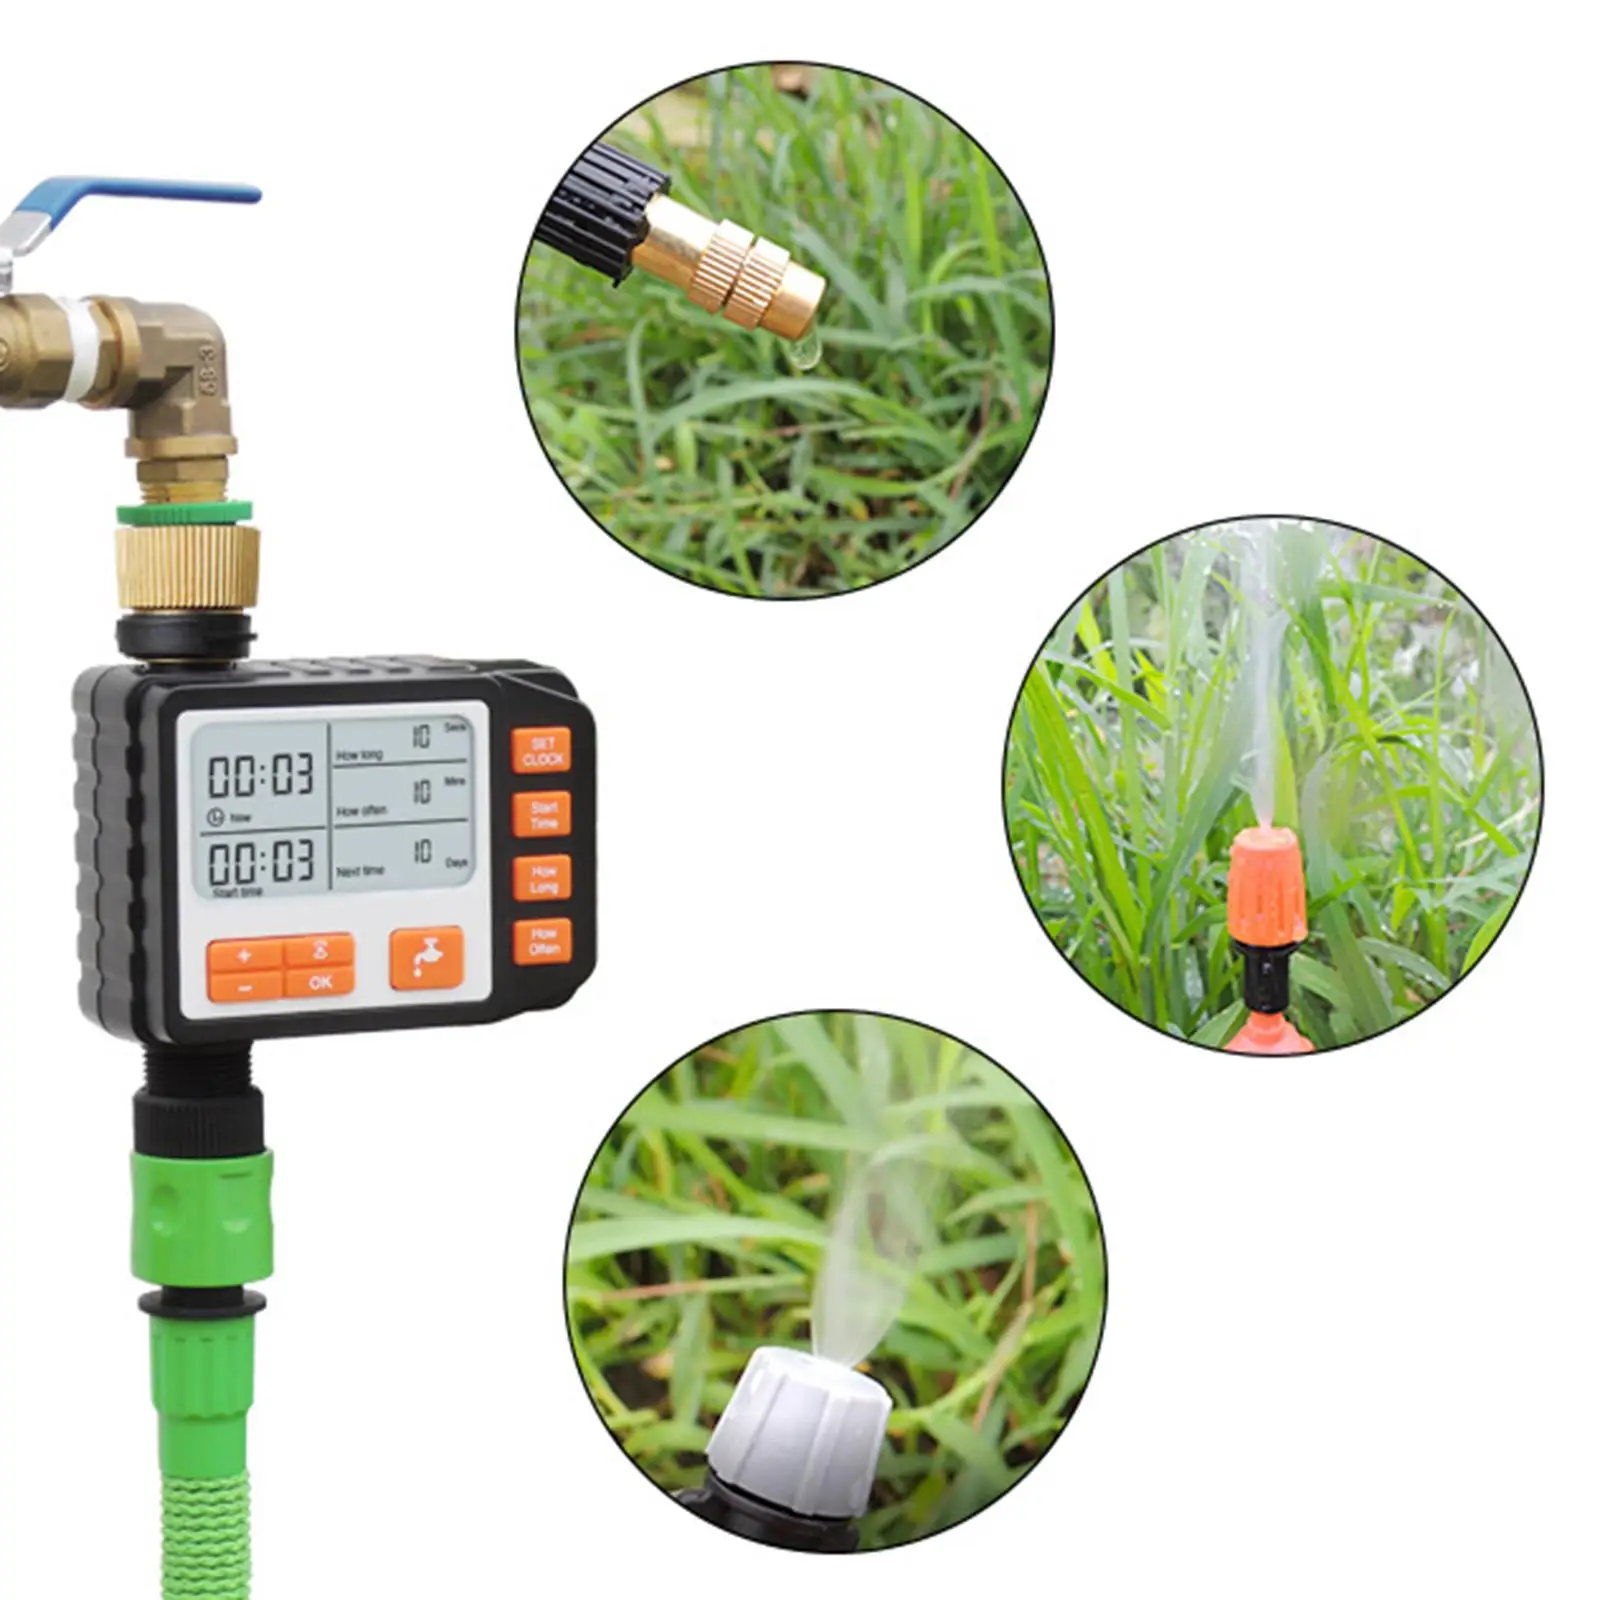 LED Screen Electronic Automatic Water Timer Sprinkler Controller Outdoor Garden Timer Automatic Watering Device Irrigation Tool